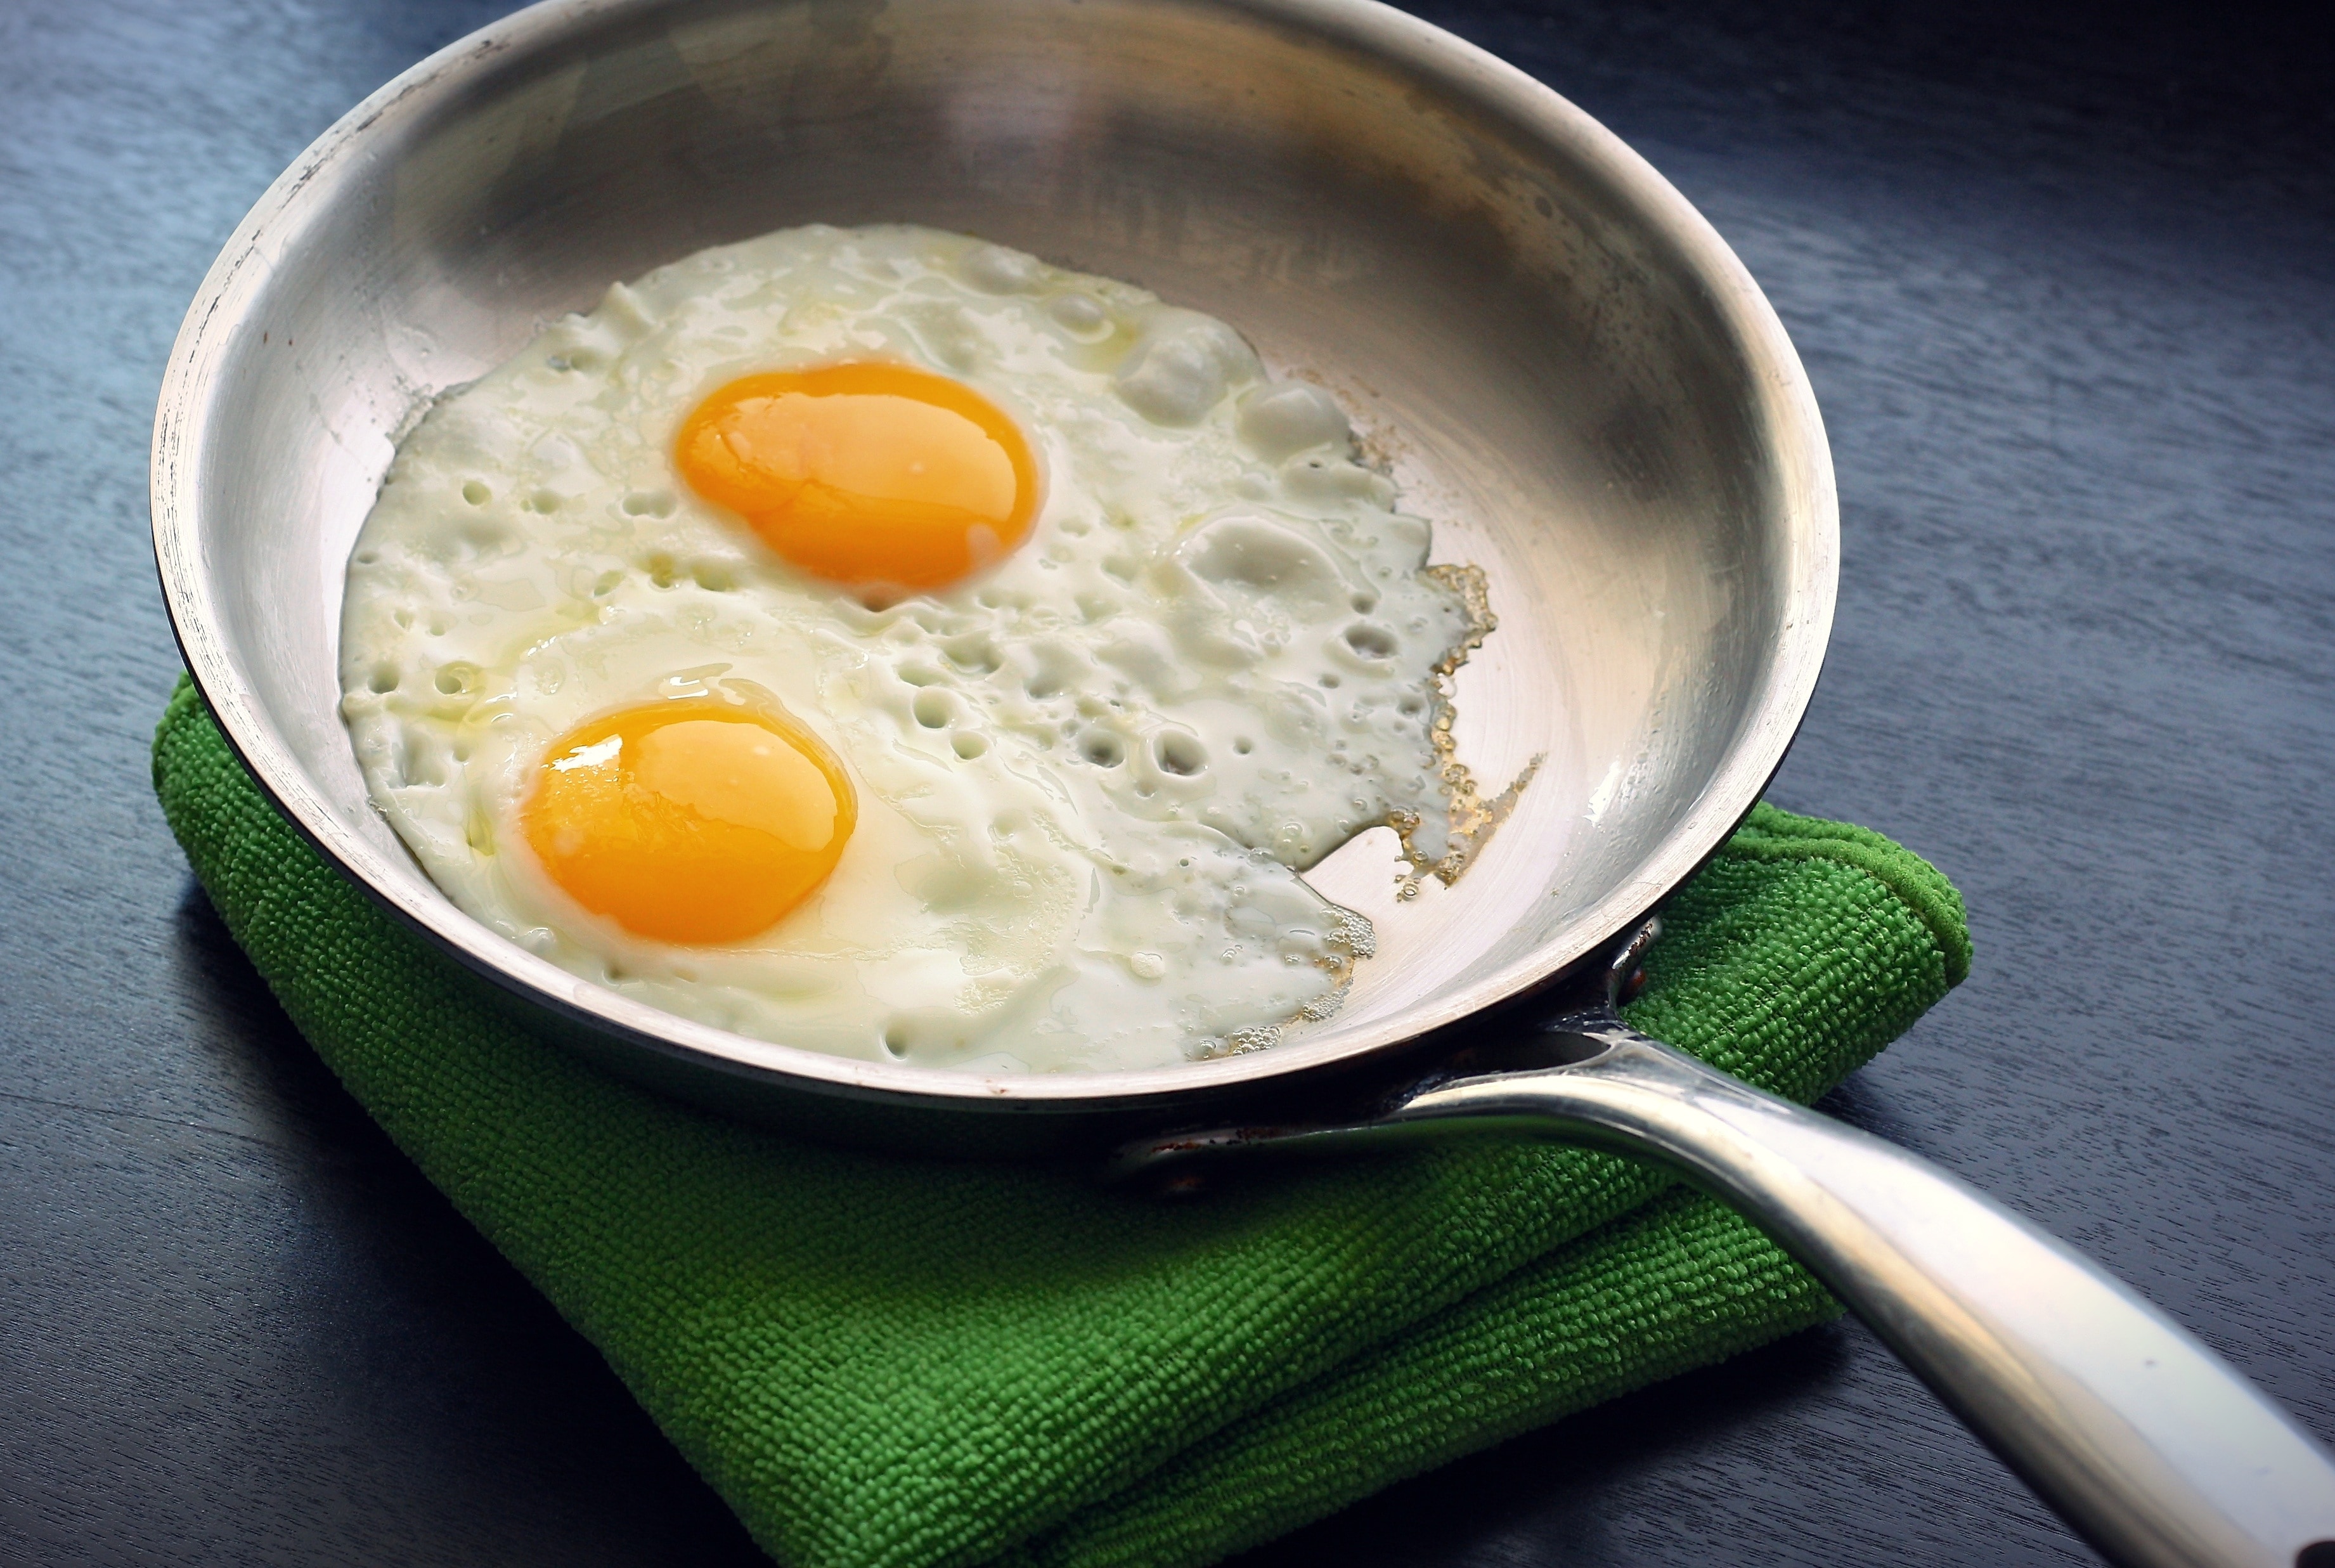 stainless steel skillet and 2 sunny side ups